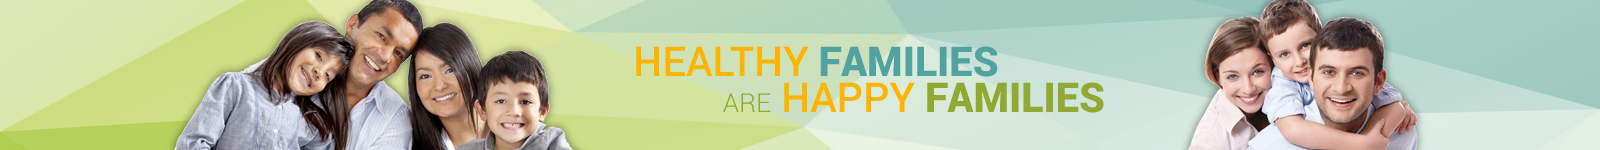 Healthy Familys are Happy Families